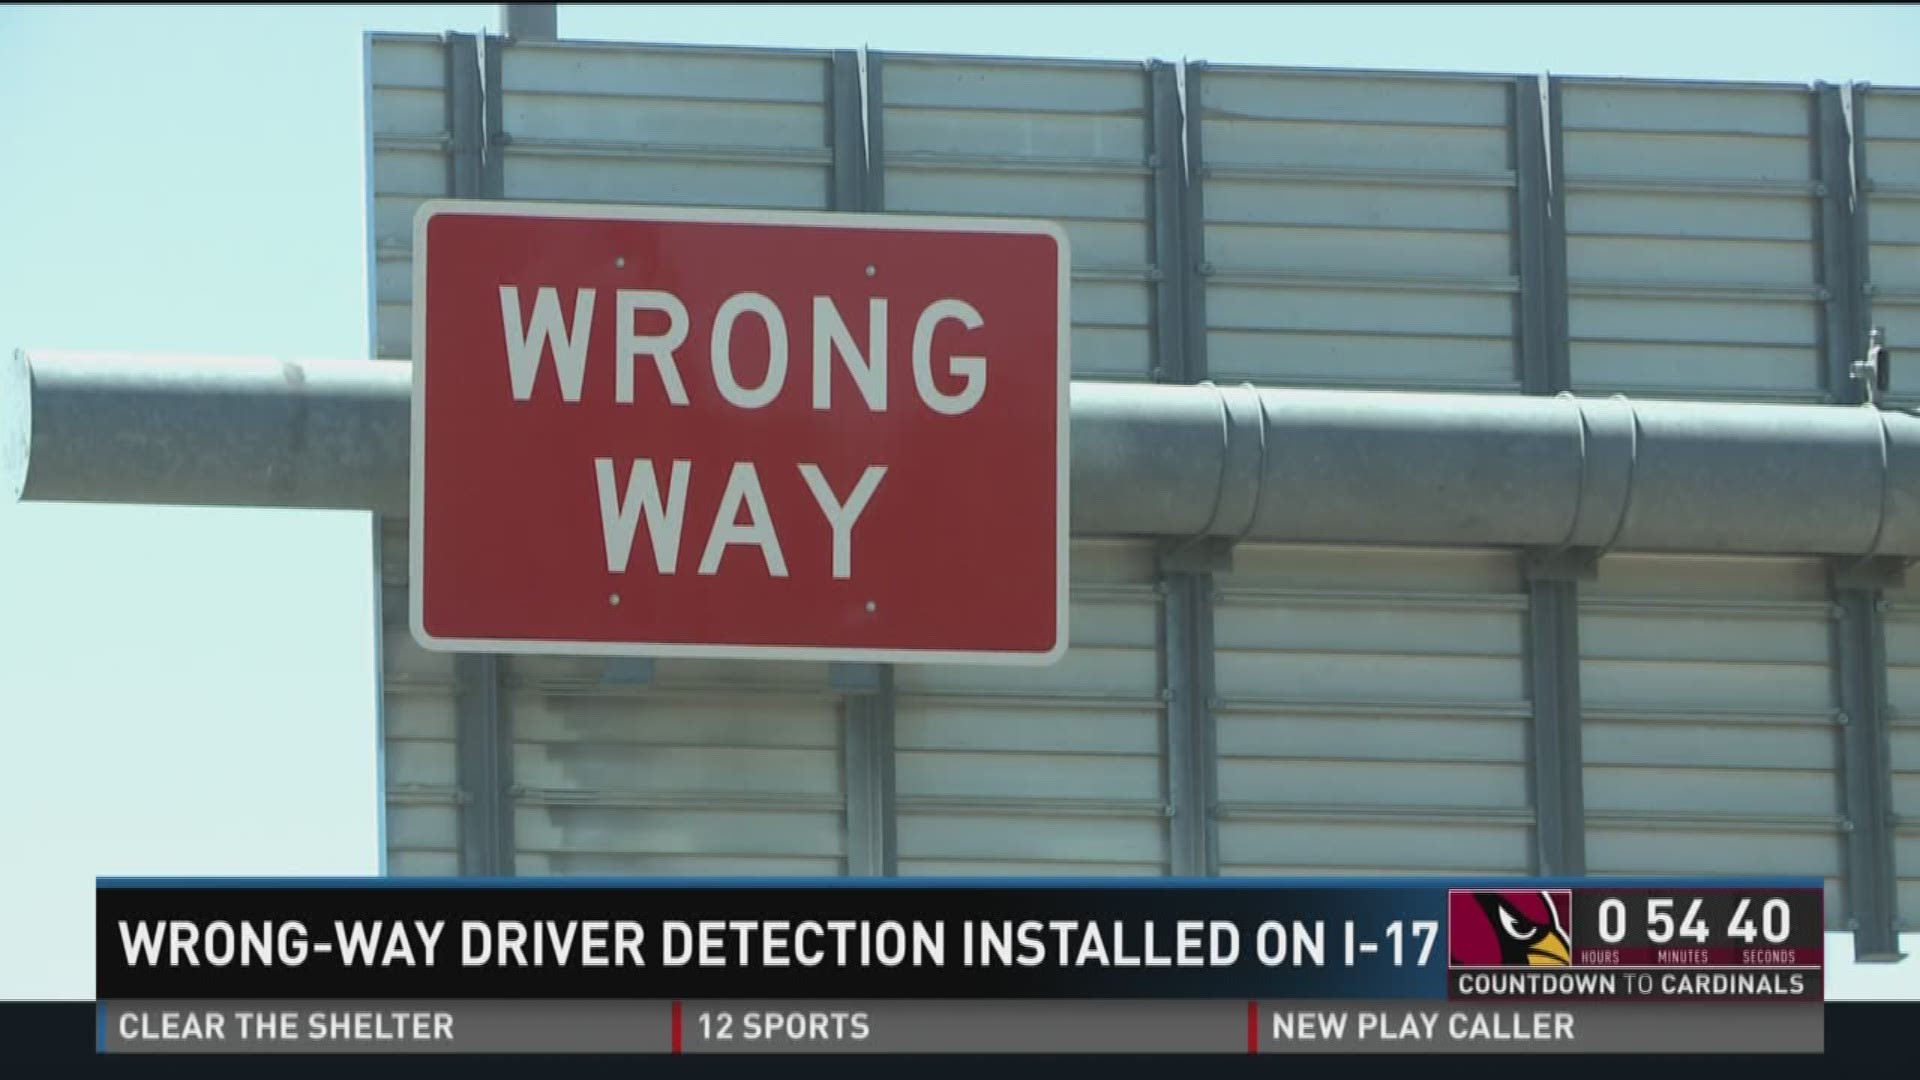 Wrong-way driver detection installed on I-17